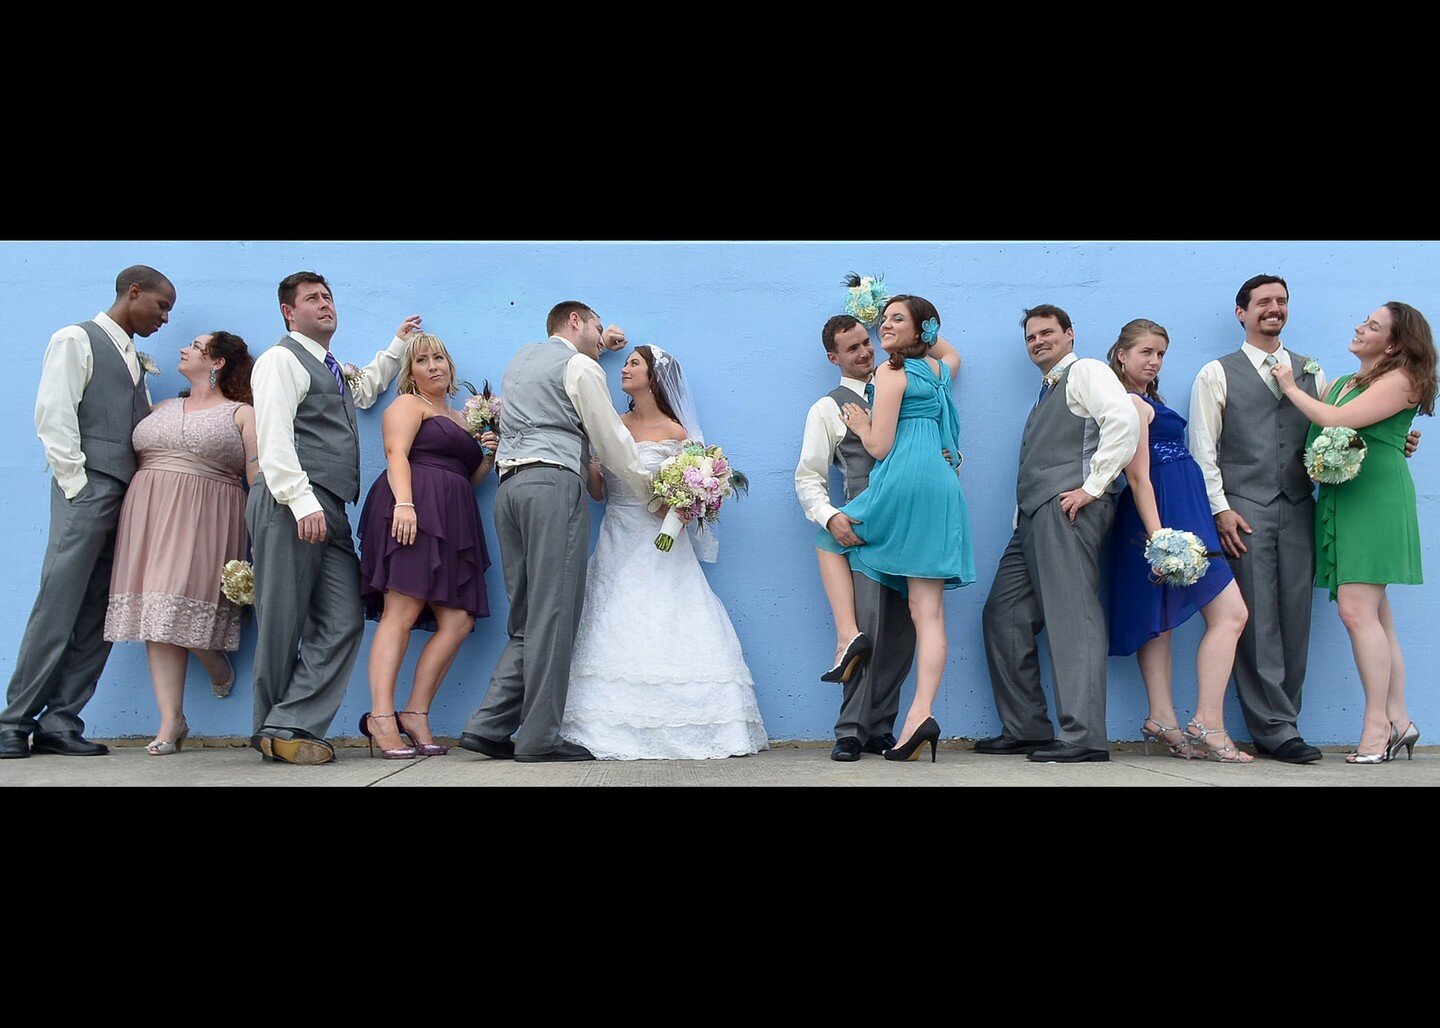 Downtown Wilmington Wedding. Shot on the riverfront. Goofing around with a wedding party picture. This wedding was a lot of fun, had a blast.

#wilmingtonriverfront #wilmingtonncwedding #downtownwilmingtonnc #wilmingtonncweddingphotographer #billybea